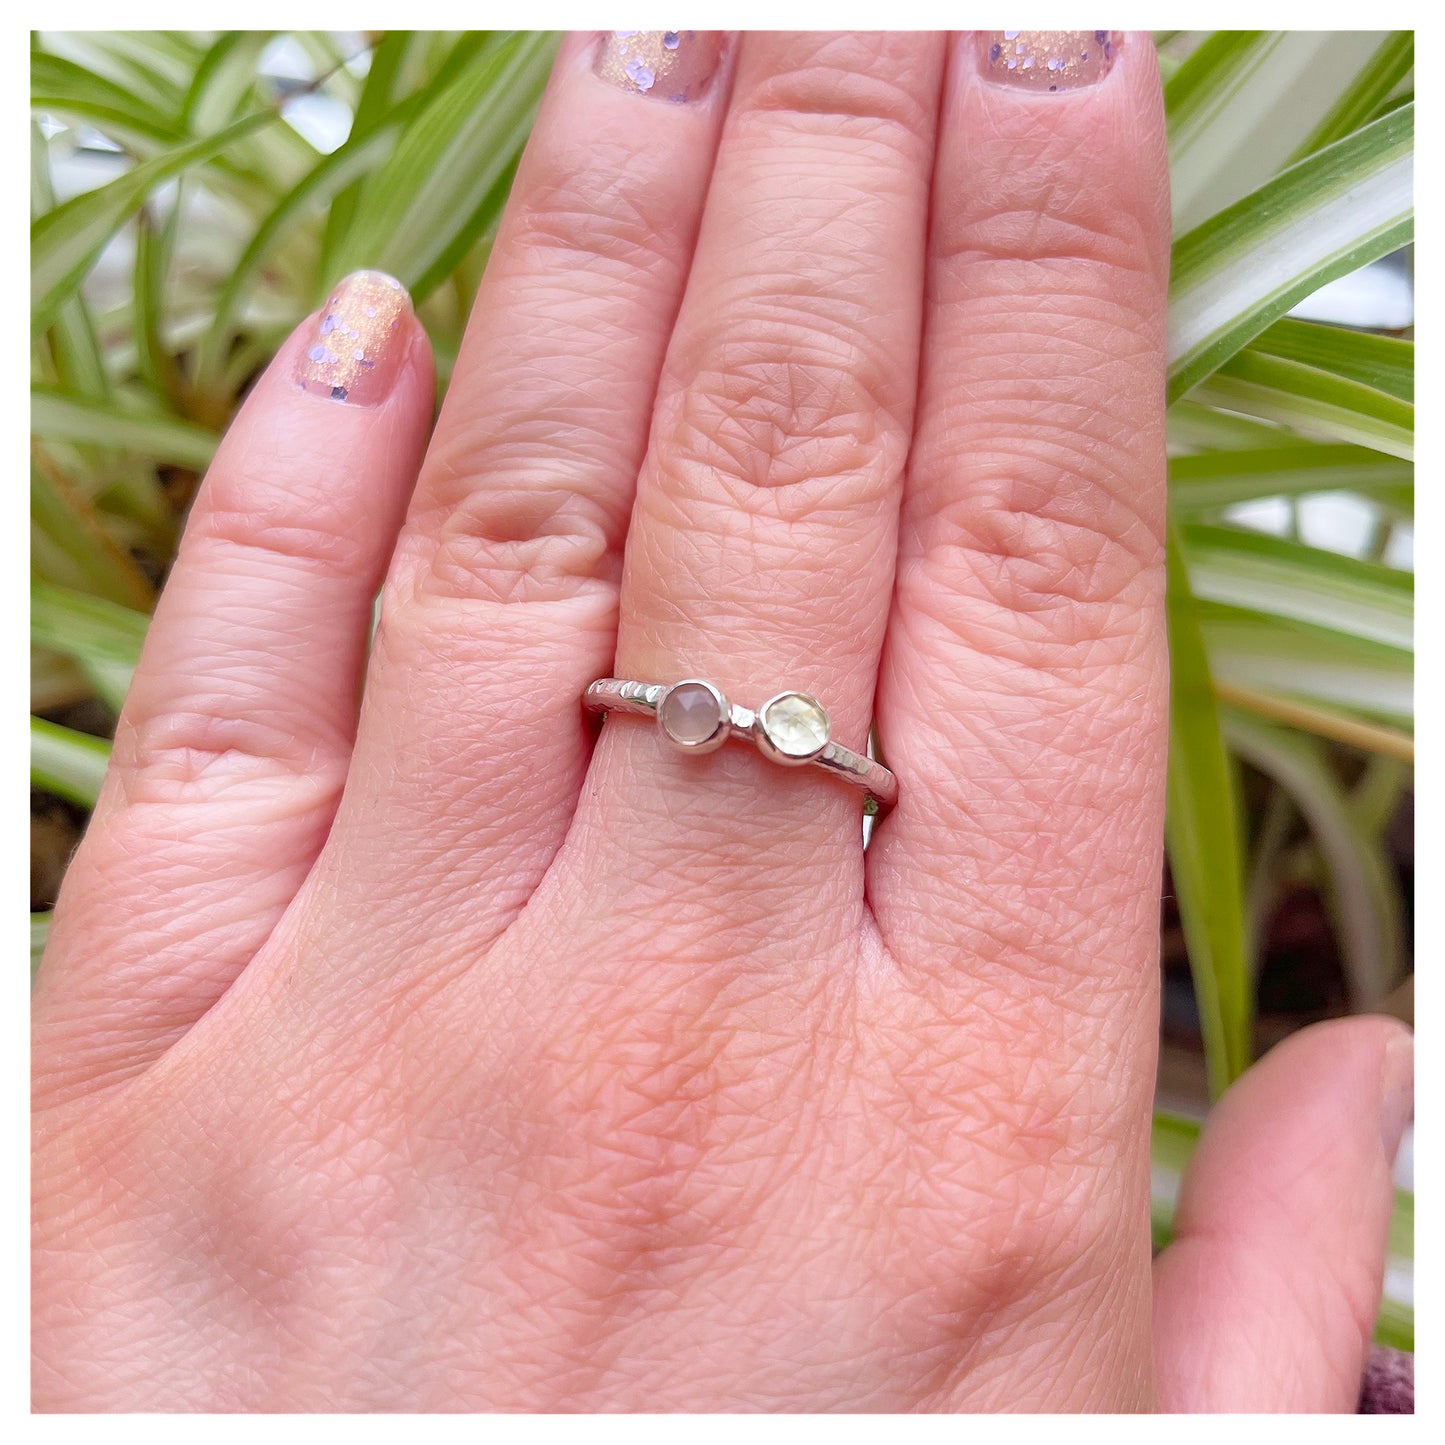 Sterling Silver Peach Moonstone and Lemon Quartz Hammered Band Ring.